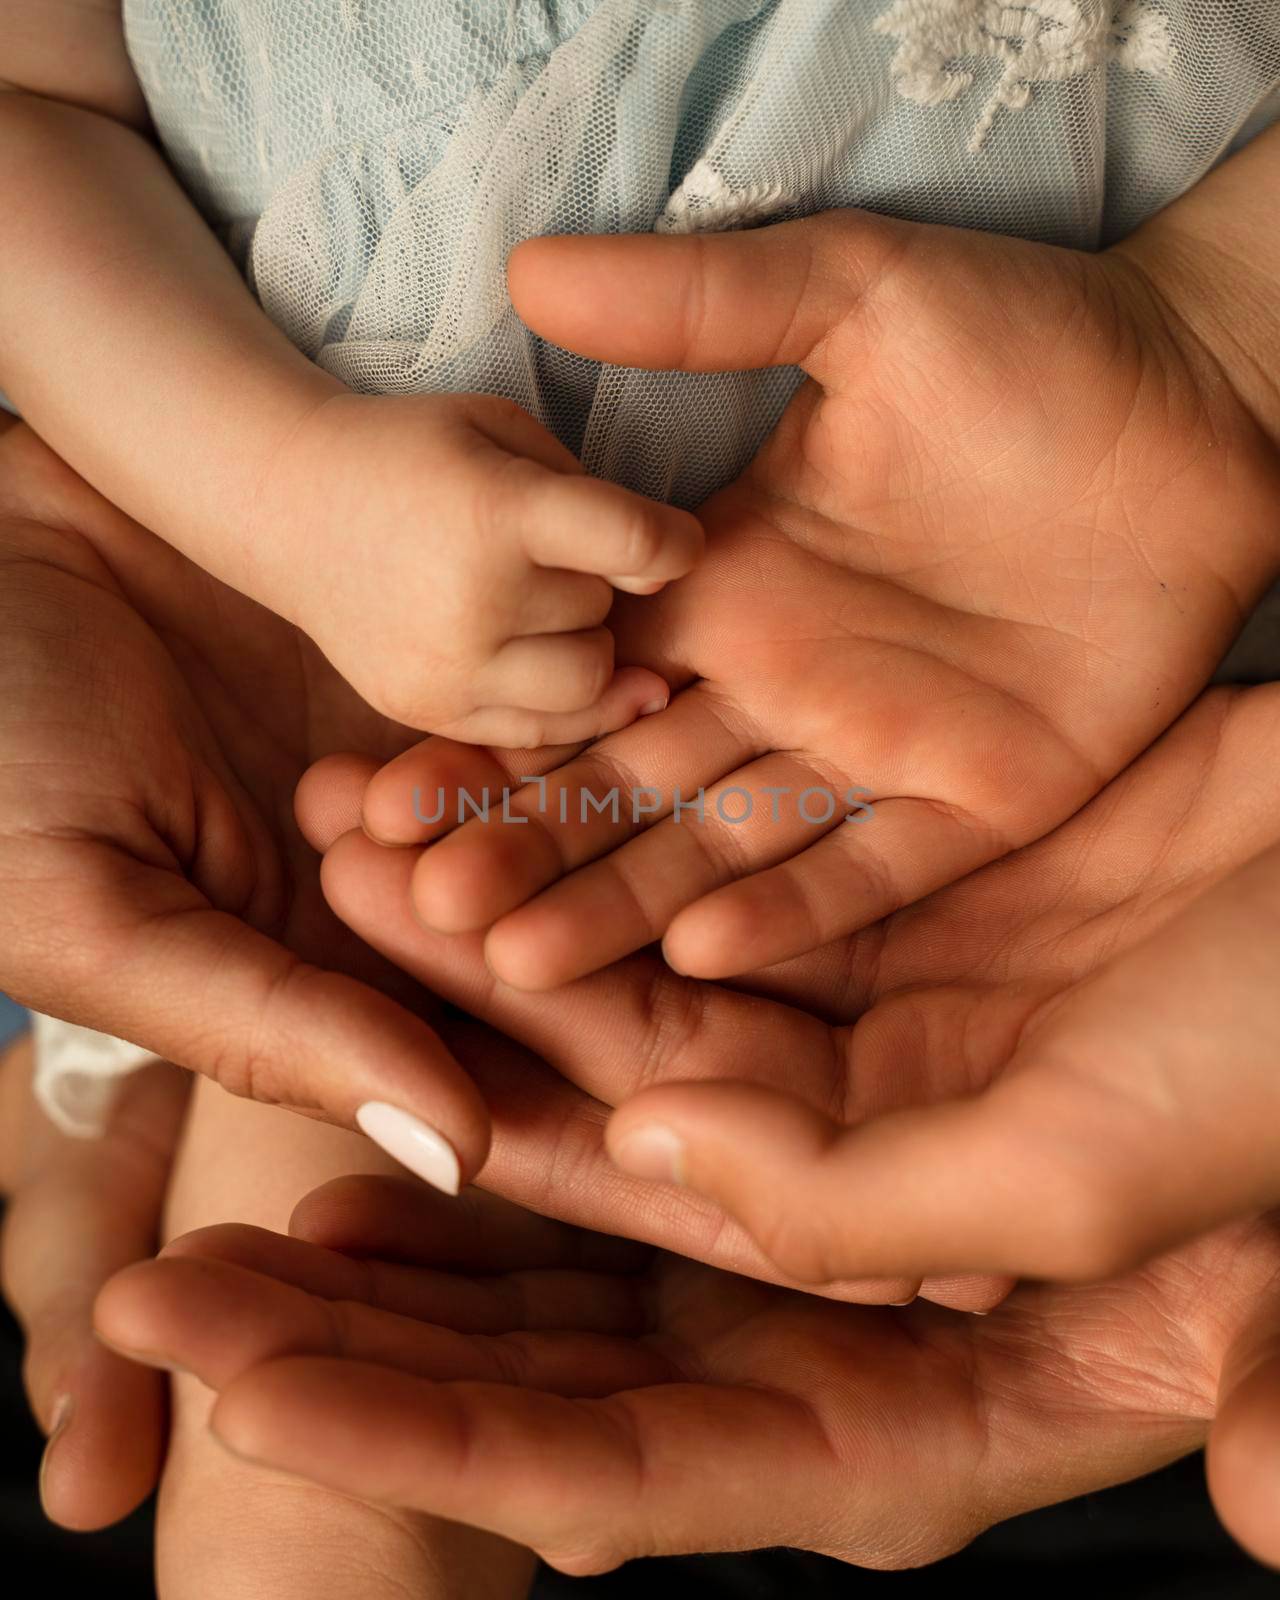 Close up of loving mom dad and kid hold hands on floor palms up together express closeness and unity, caring parents join stack arms with child show devotion, support and bonding. Family value concept. by Matiunina